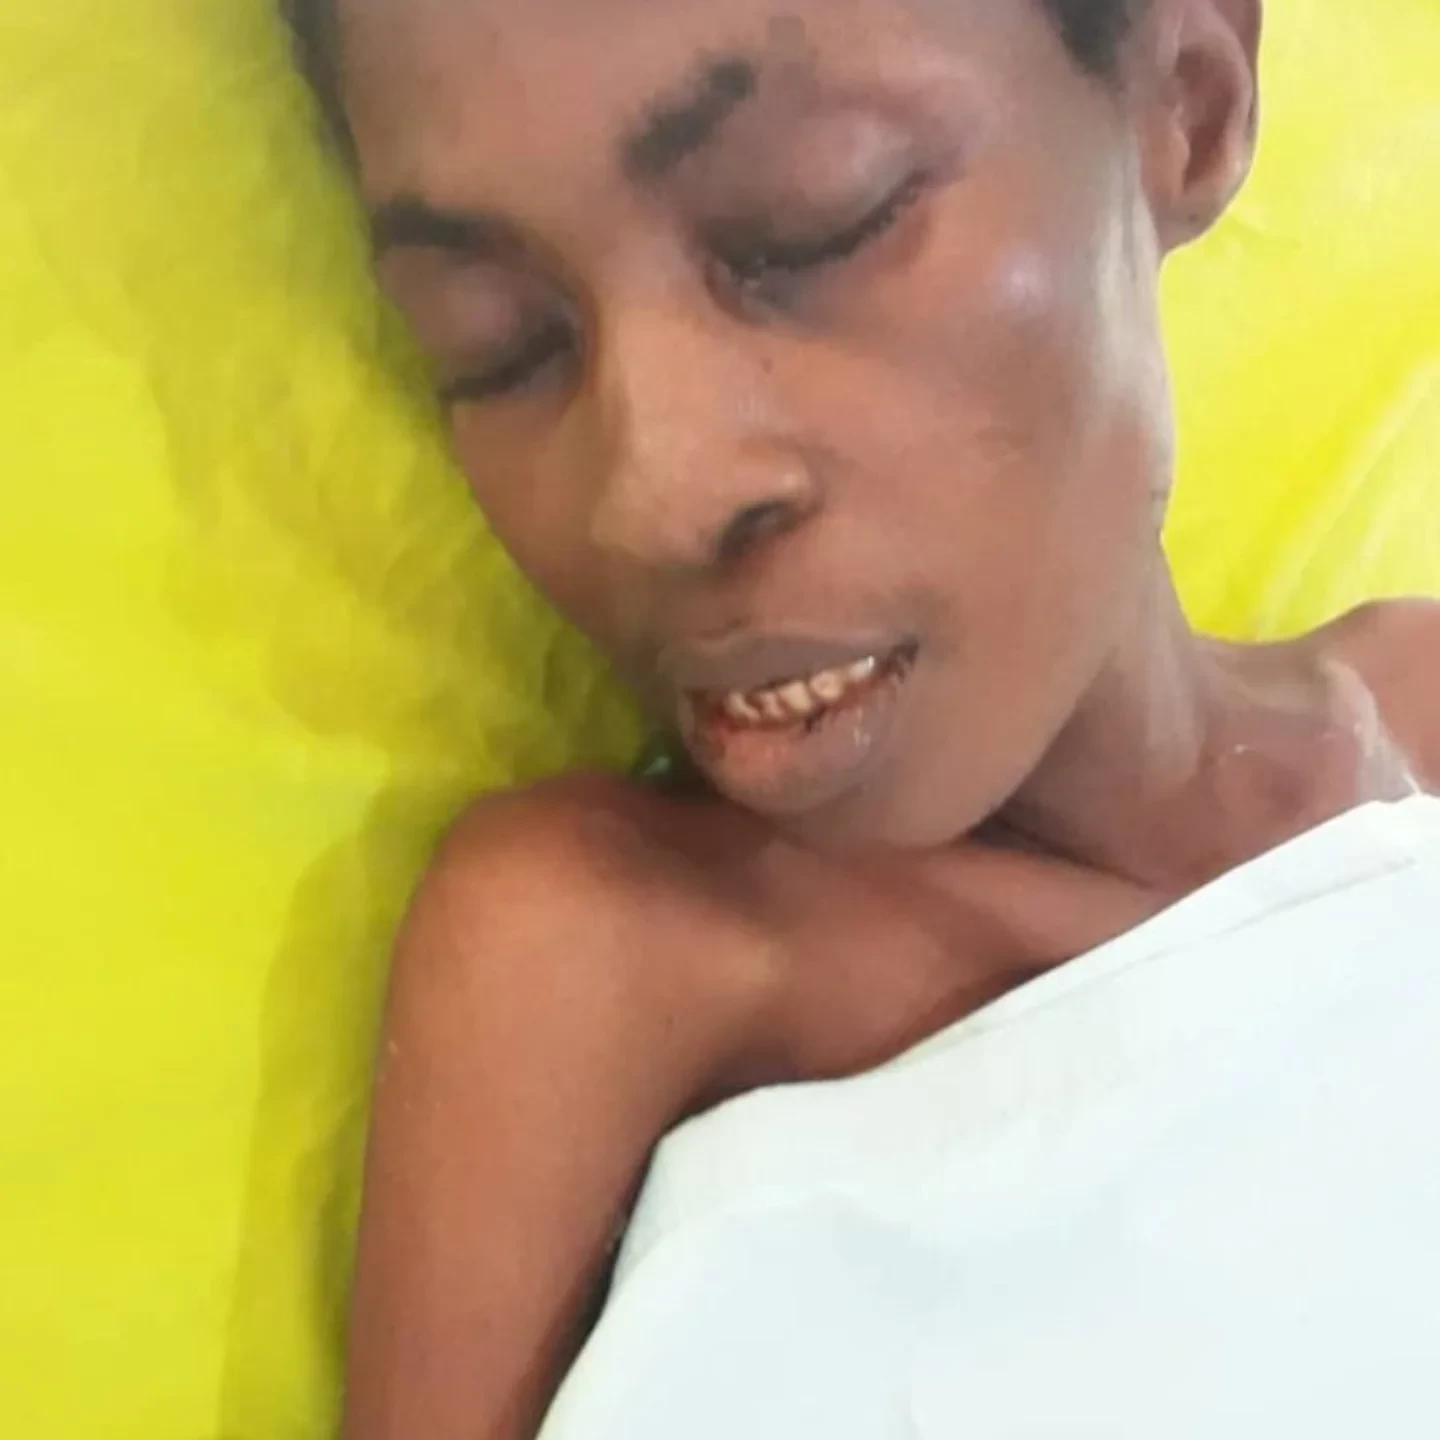 Man drops unconscious woman at Enugu hospital and disappears